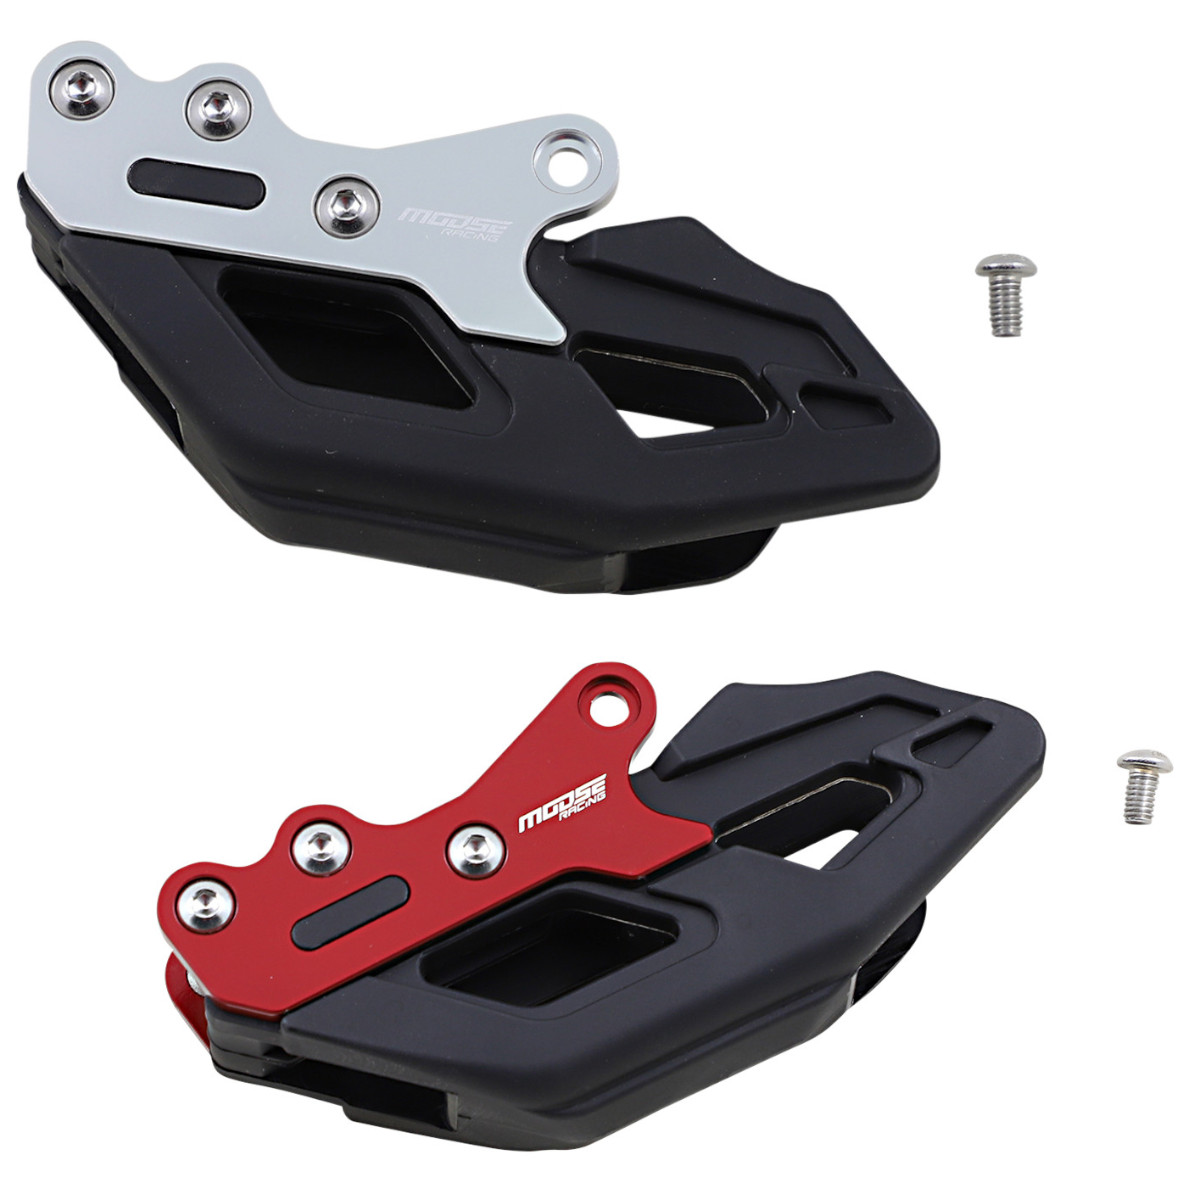 Guide Chaine Moose Racing pour Honda CRF 450 R (07-19)